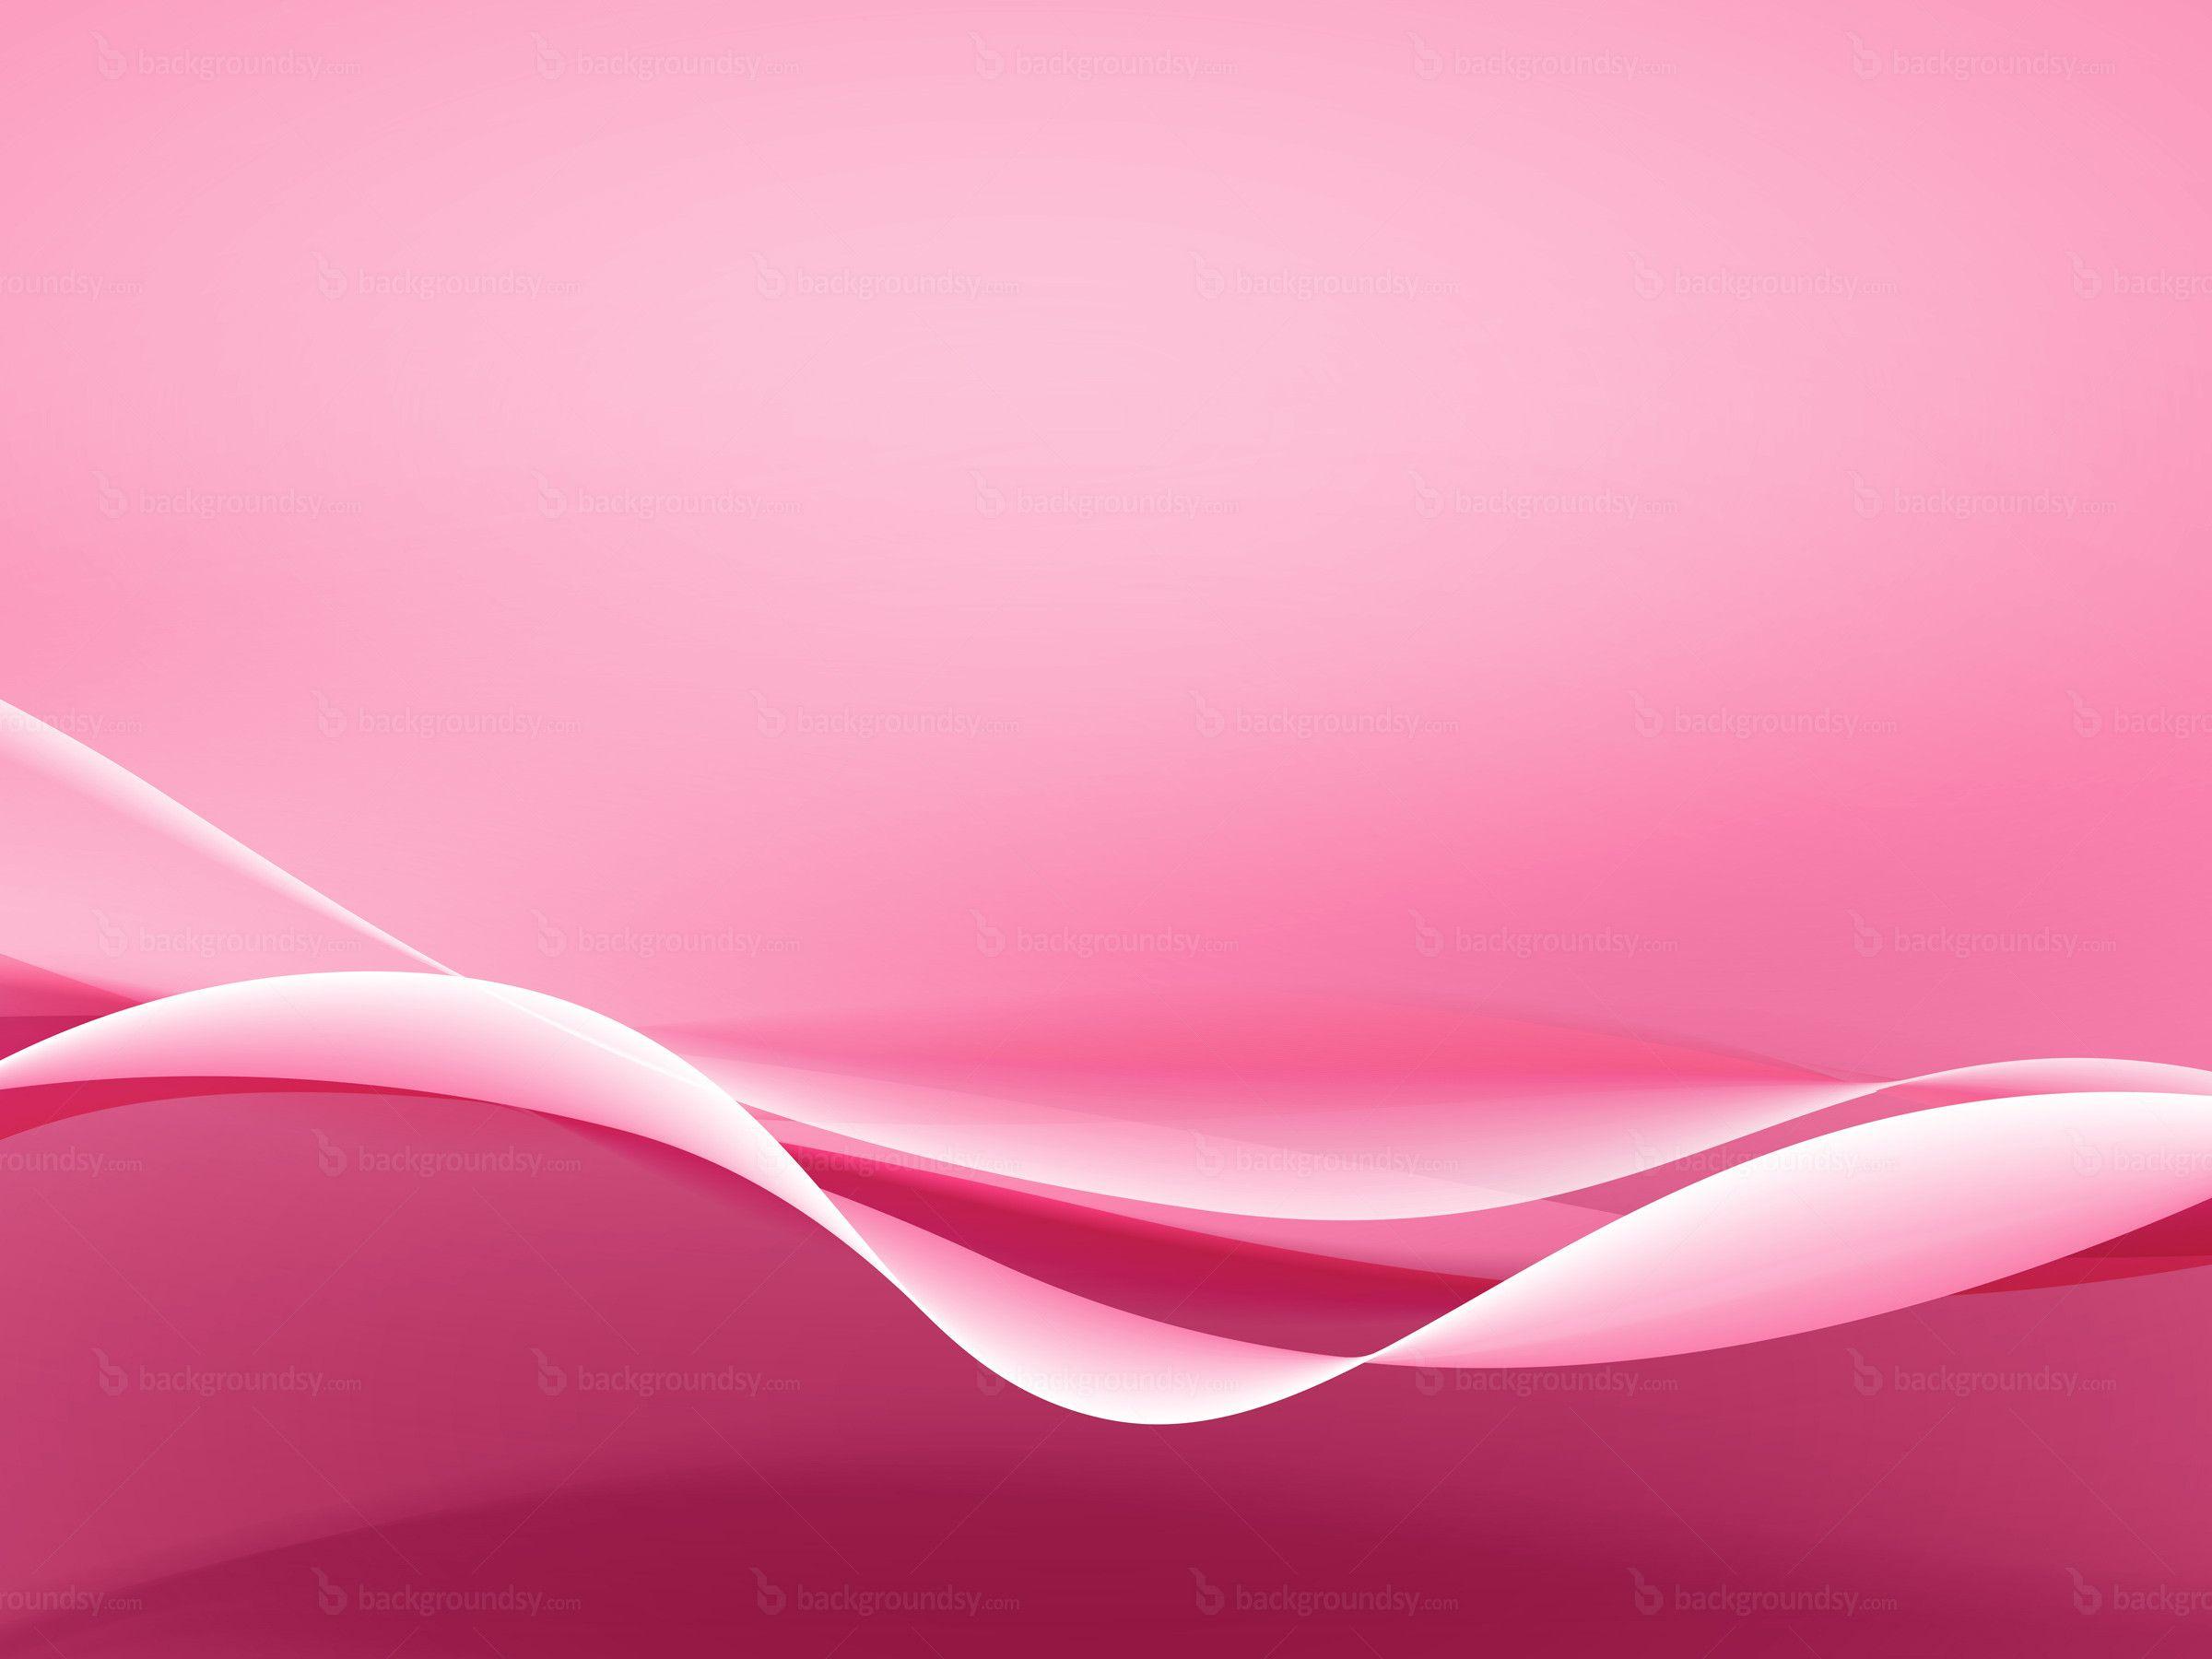 Pink Image For Backgrounds - Wallpaper Cave